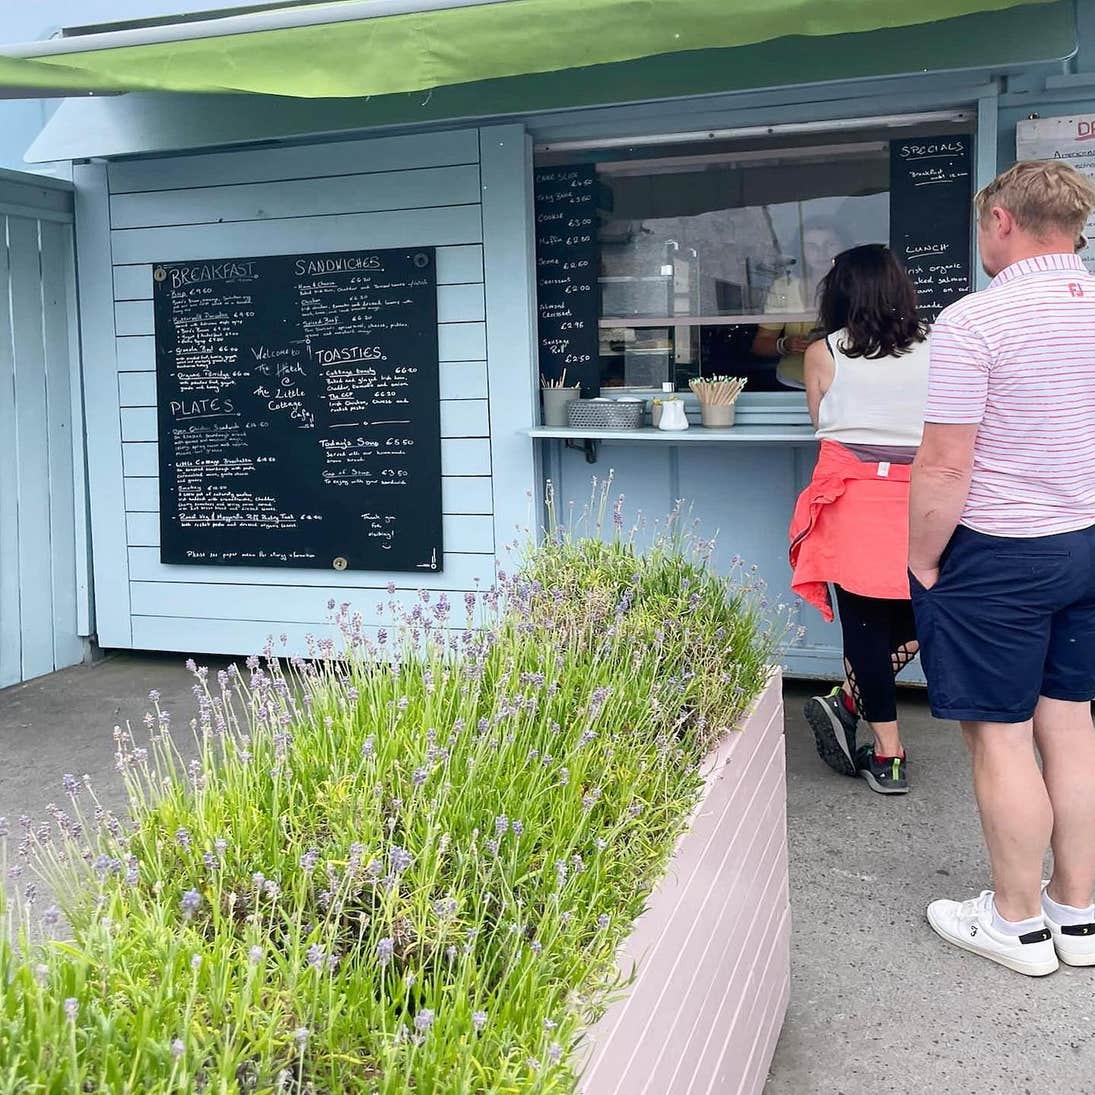 Two people ordering from the hatch at the Little Cottage Café in Rosses Point in County Sligo.